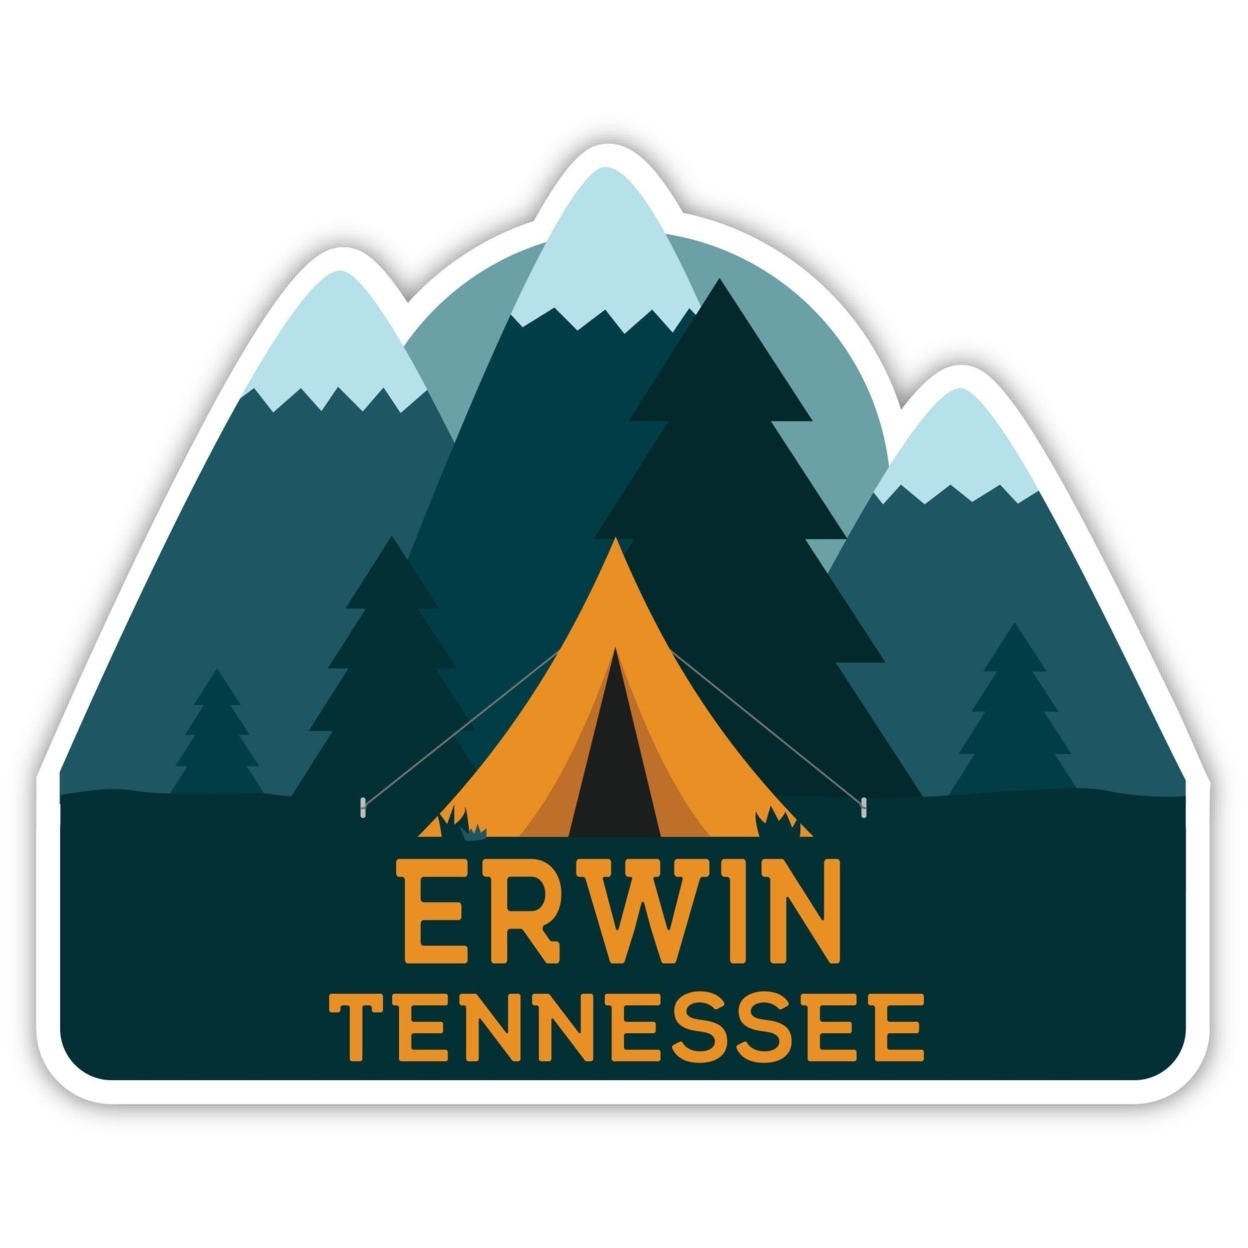 Erwin Tennessee Souvenir Decorative Stickers (Choose Theme And Size) - Single Unit, 10-Inch, Tent